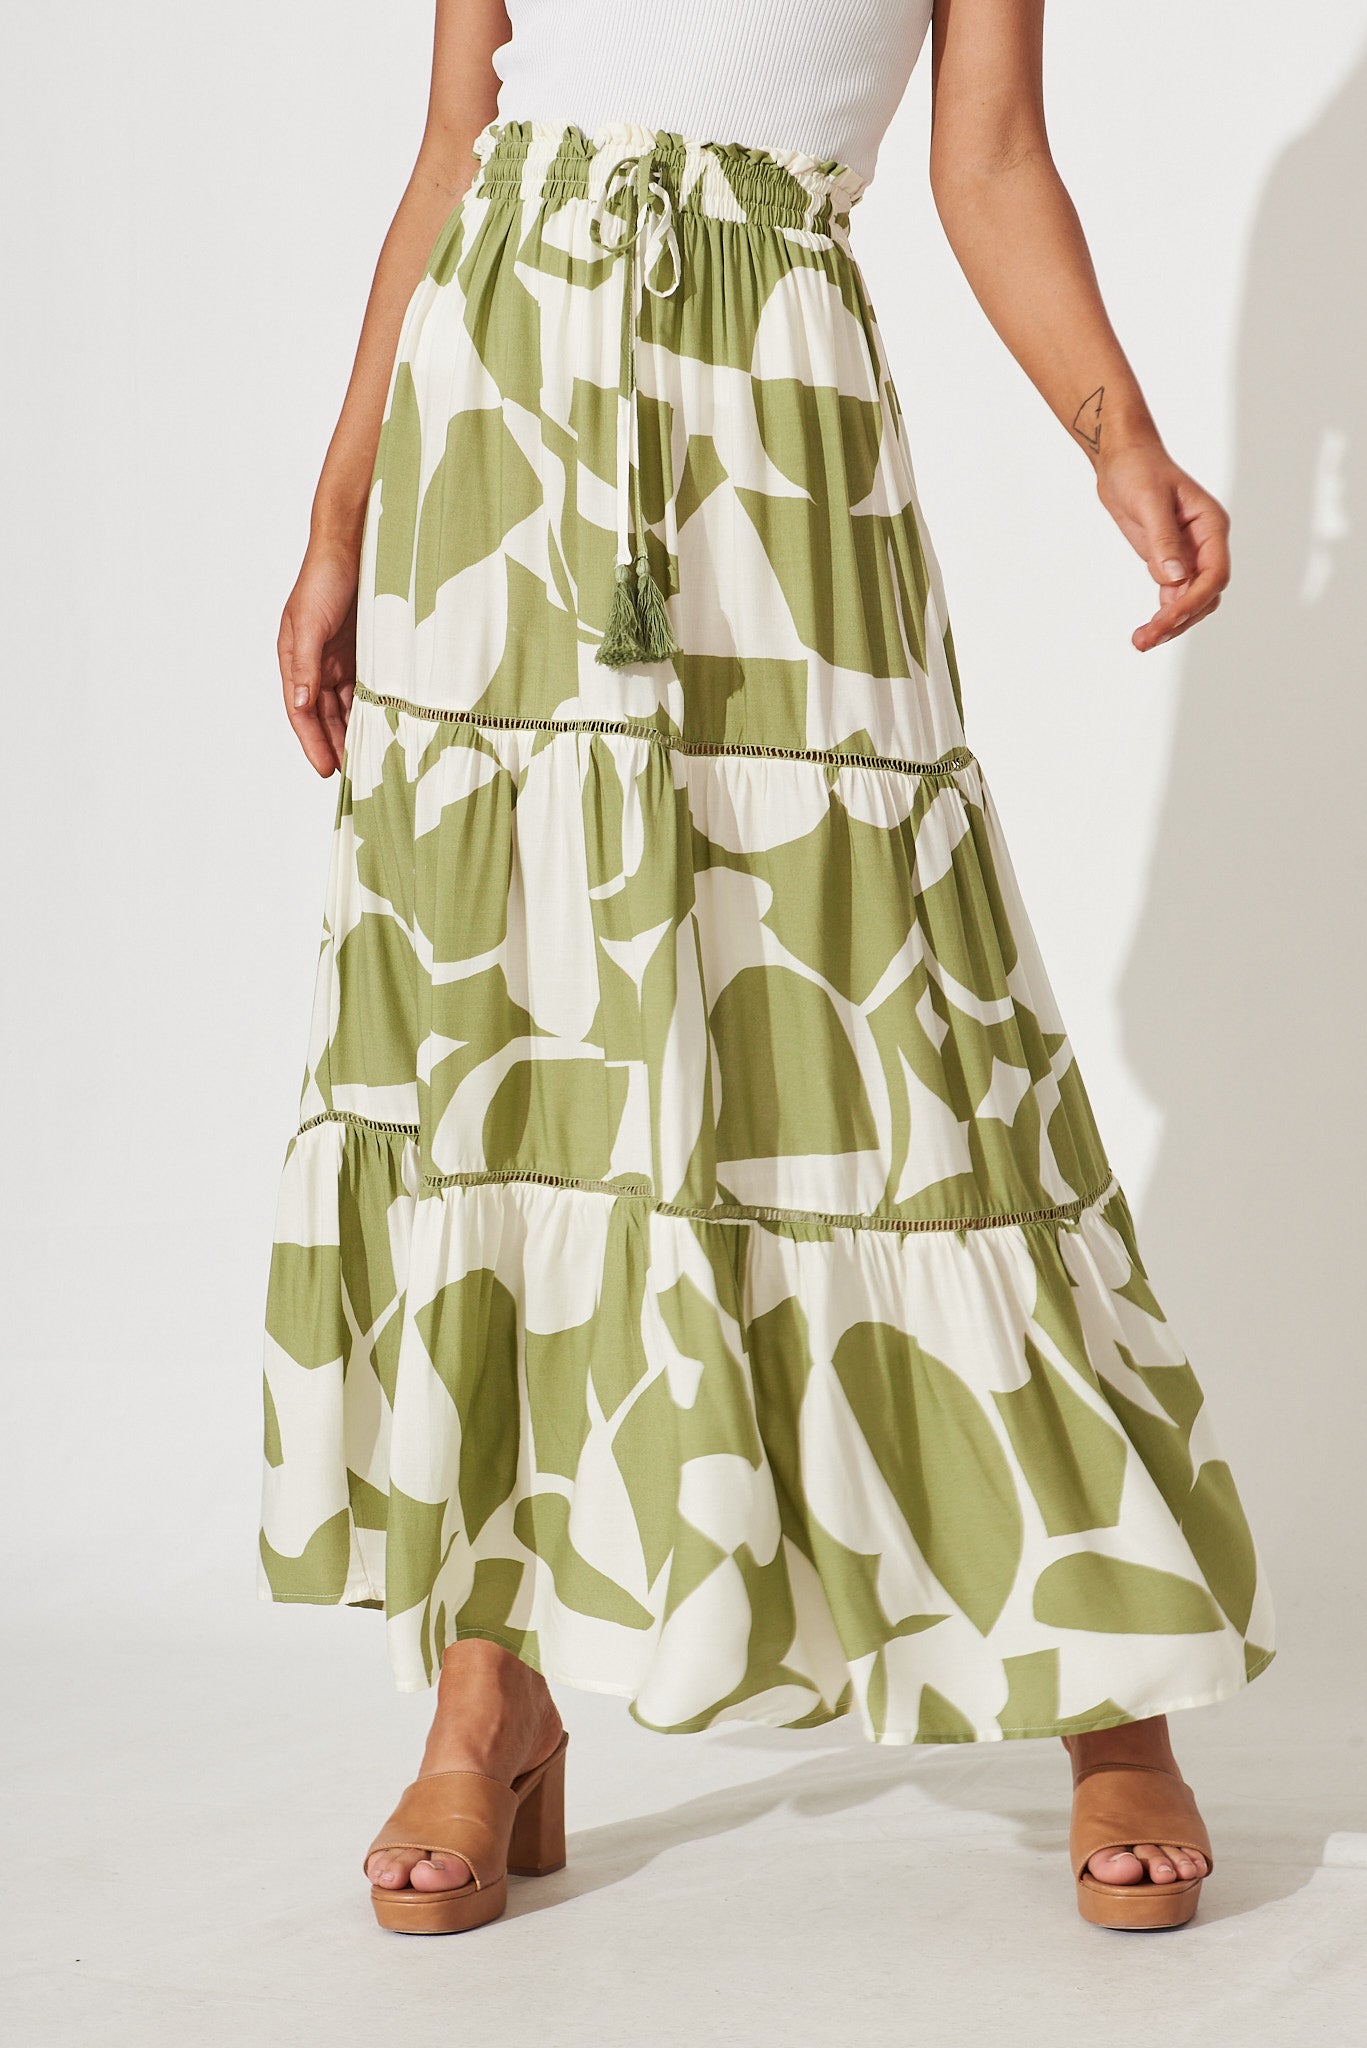 Freedom Maxi Skirt In Olive And Cream Geometric Print - front